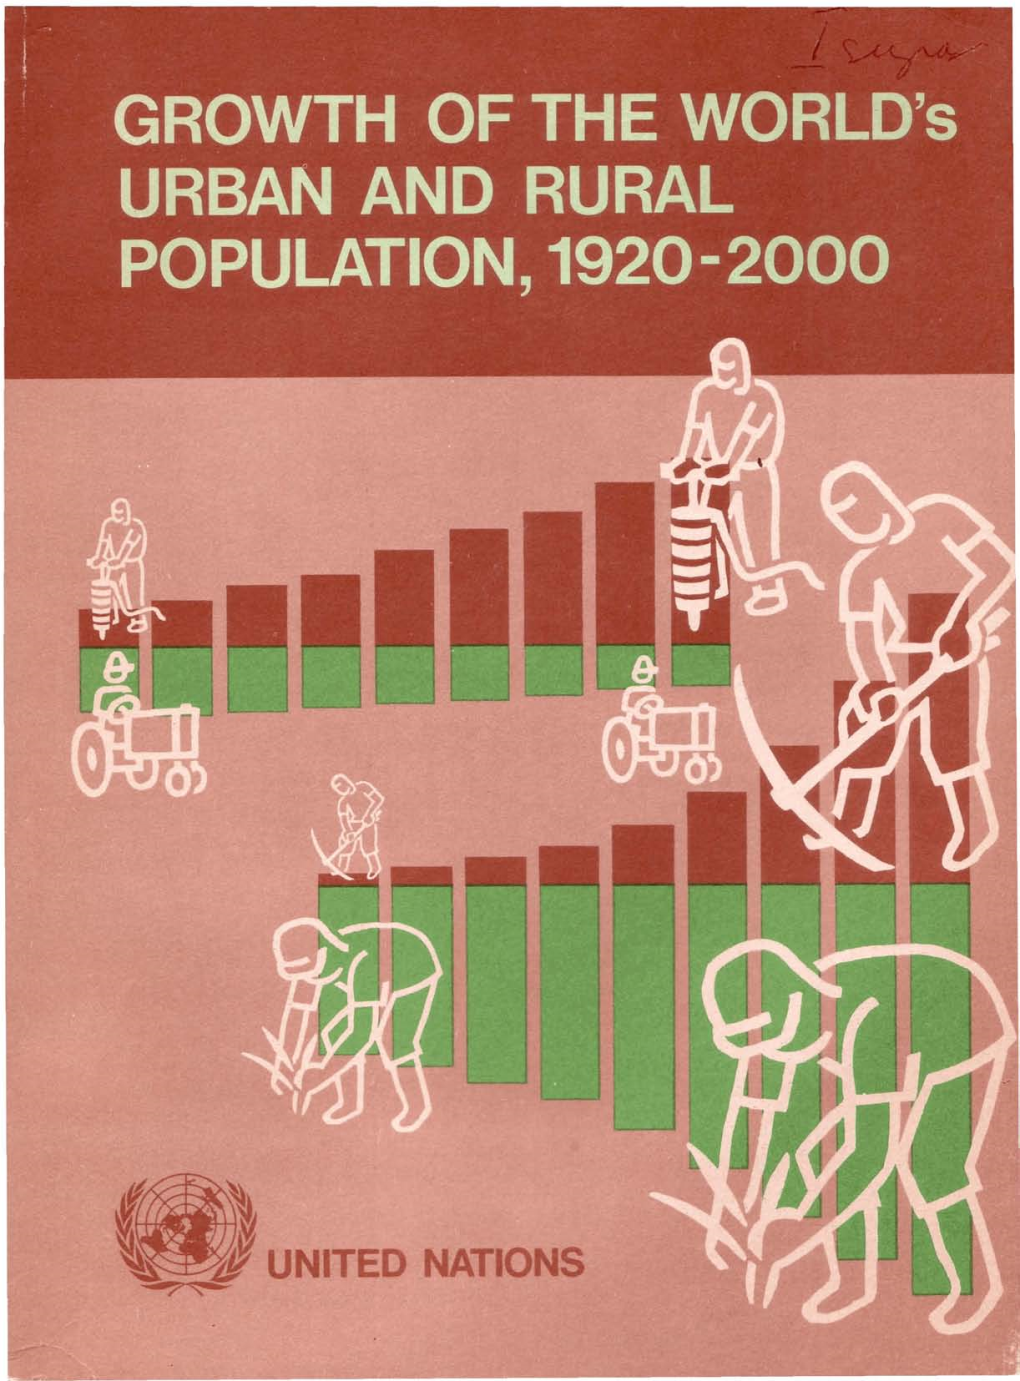 Growth of the World's Urban and Rural Population, 1920-2000